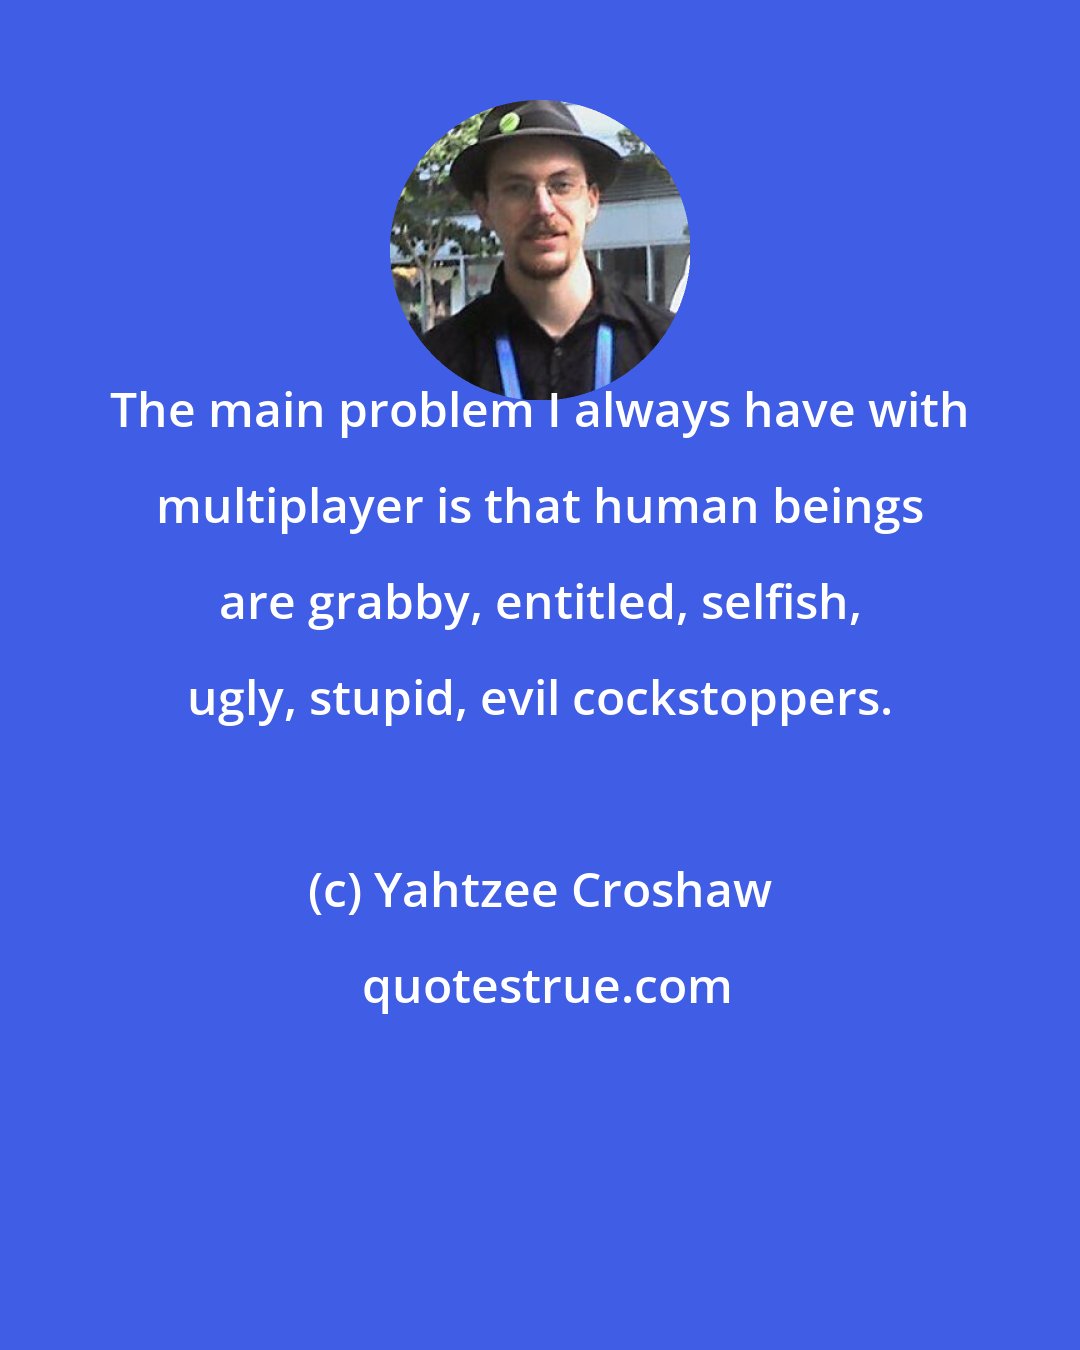 Yahtzee Croshaw: The main problem I always have with multiplayer is that human beings are grabby, entitled, selfish, ugly, stupid, evil cockstoppers.